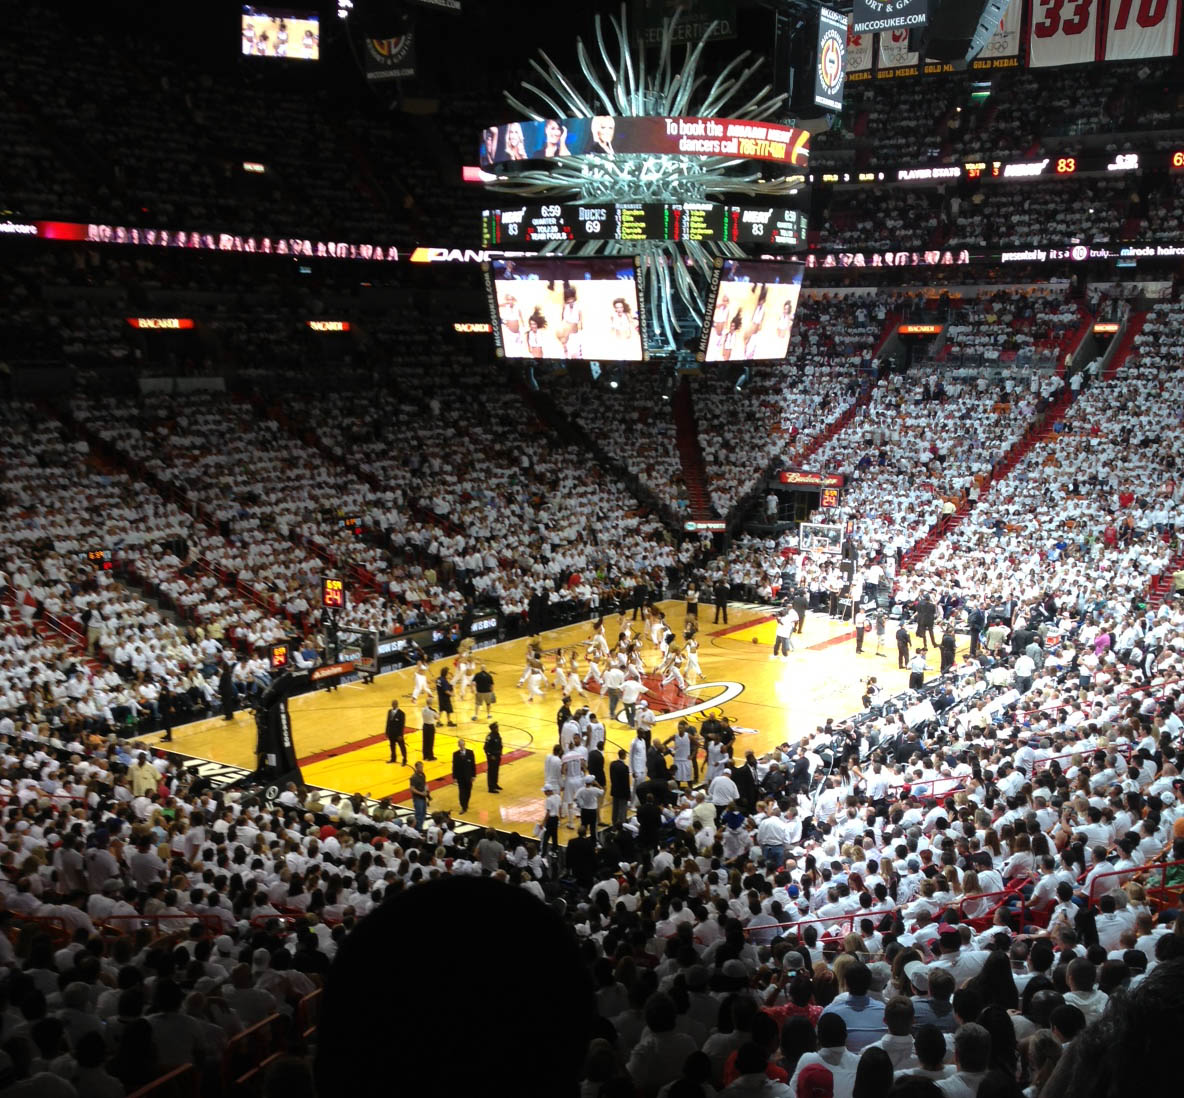 EYE ON MIAMI: The Miami Heat Won The Second Playoff Game: I went and I